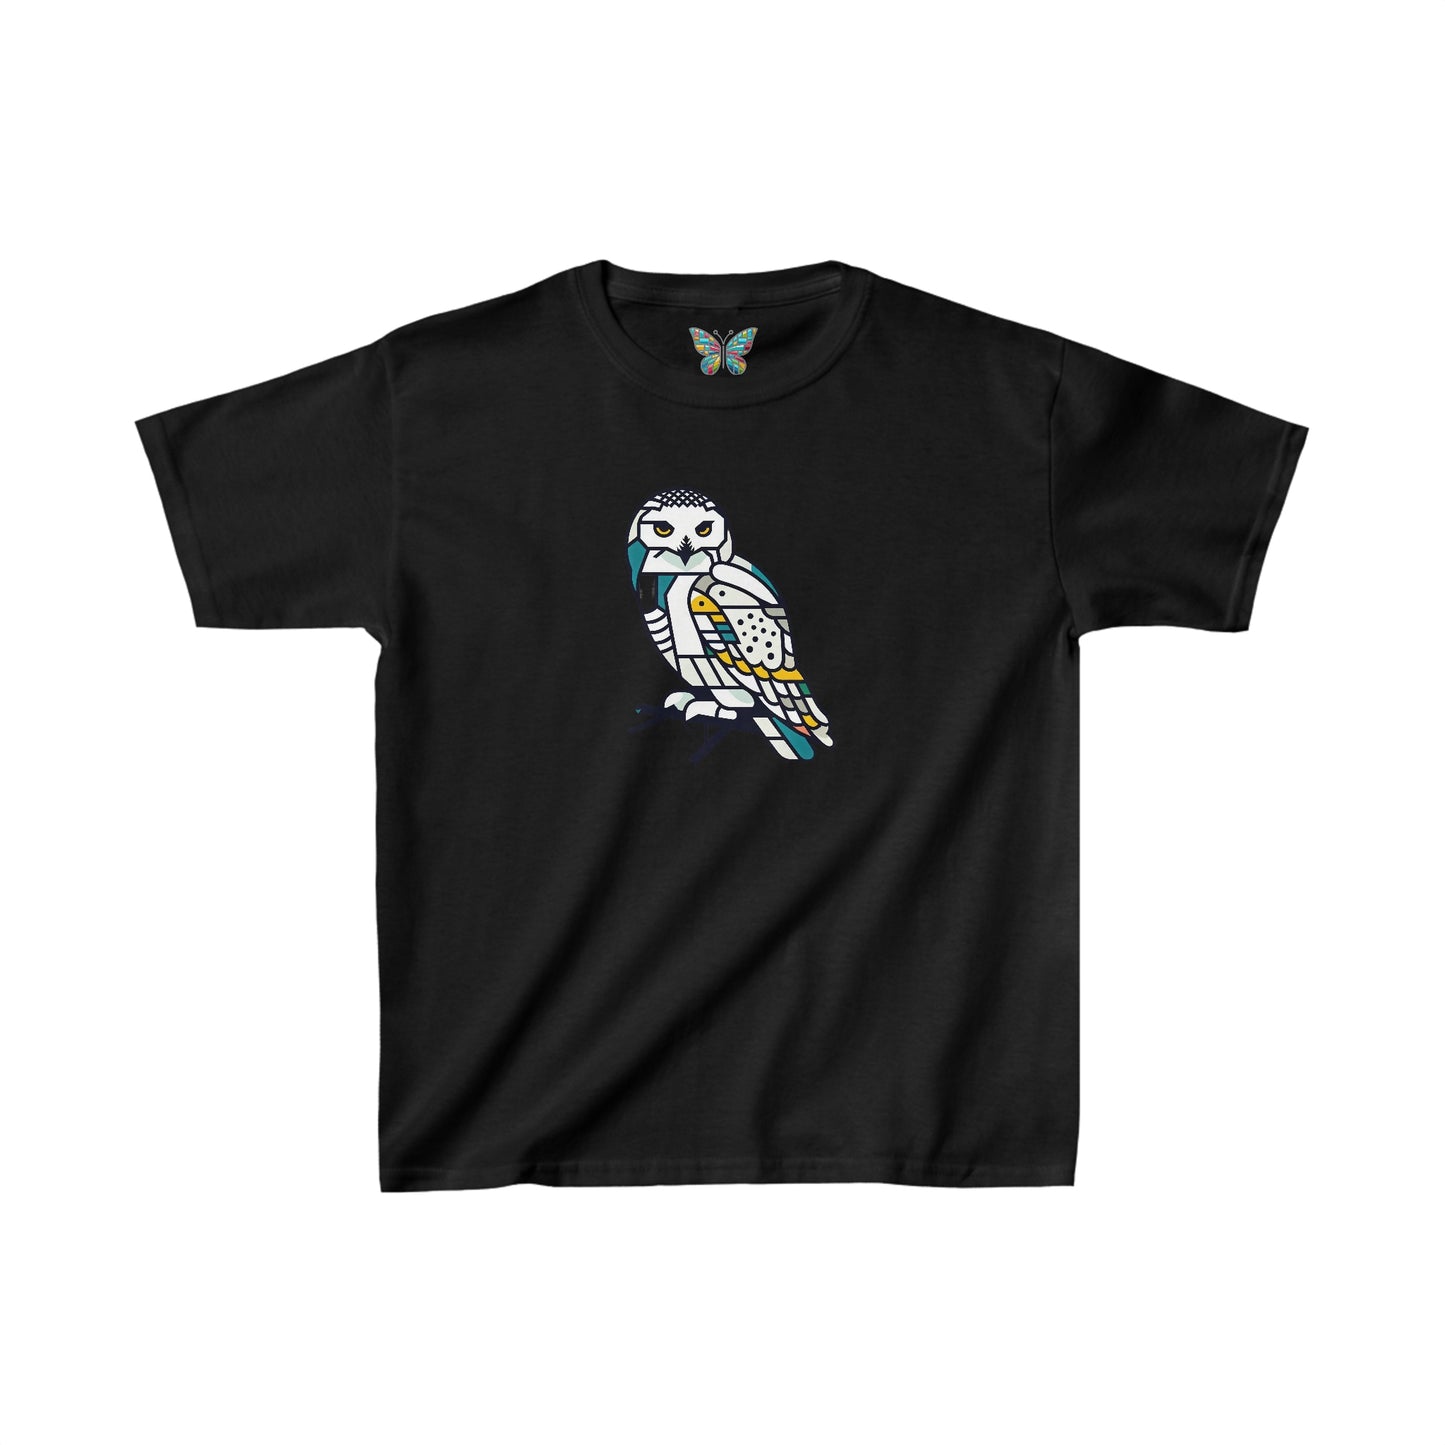 Snowy Owl Expancesthetic - Youth - Snazzle Tee